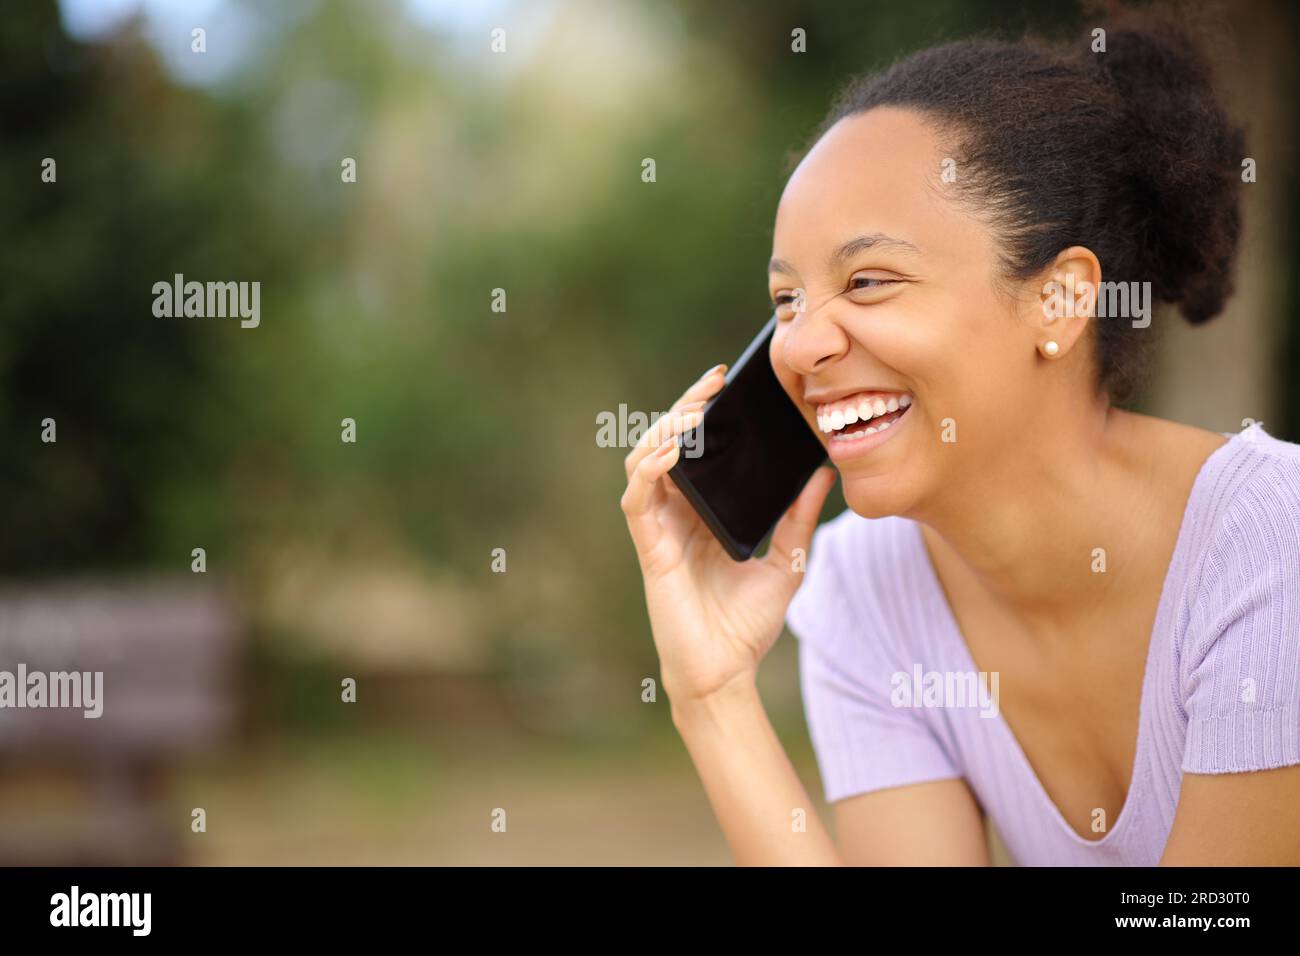 Happy black woman talking on phone laughing in a park Stock Photo